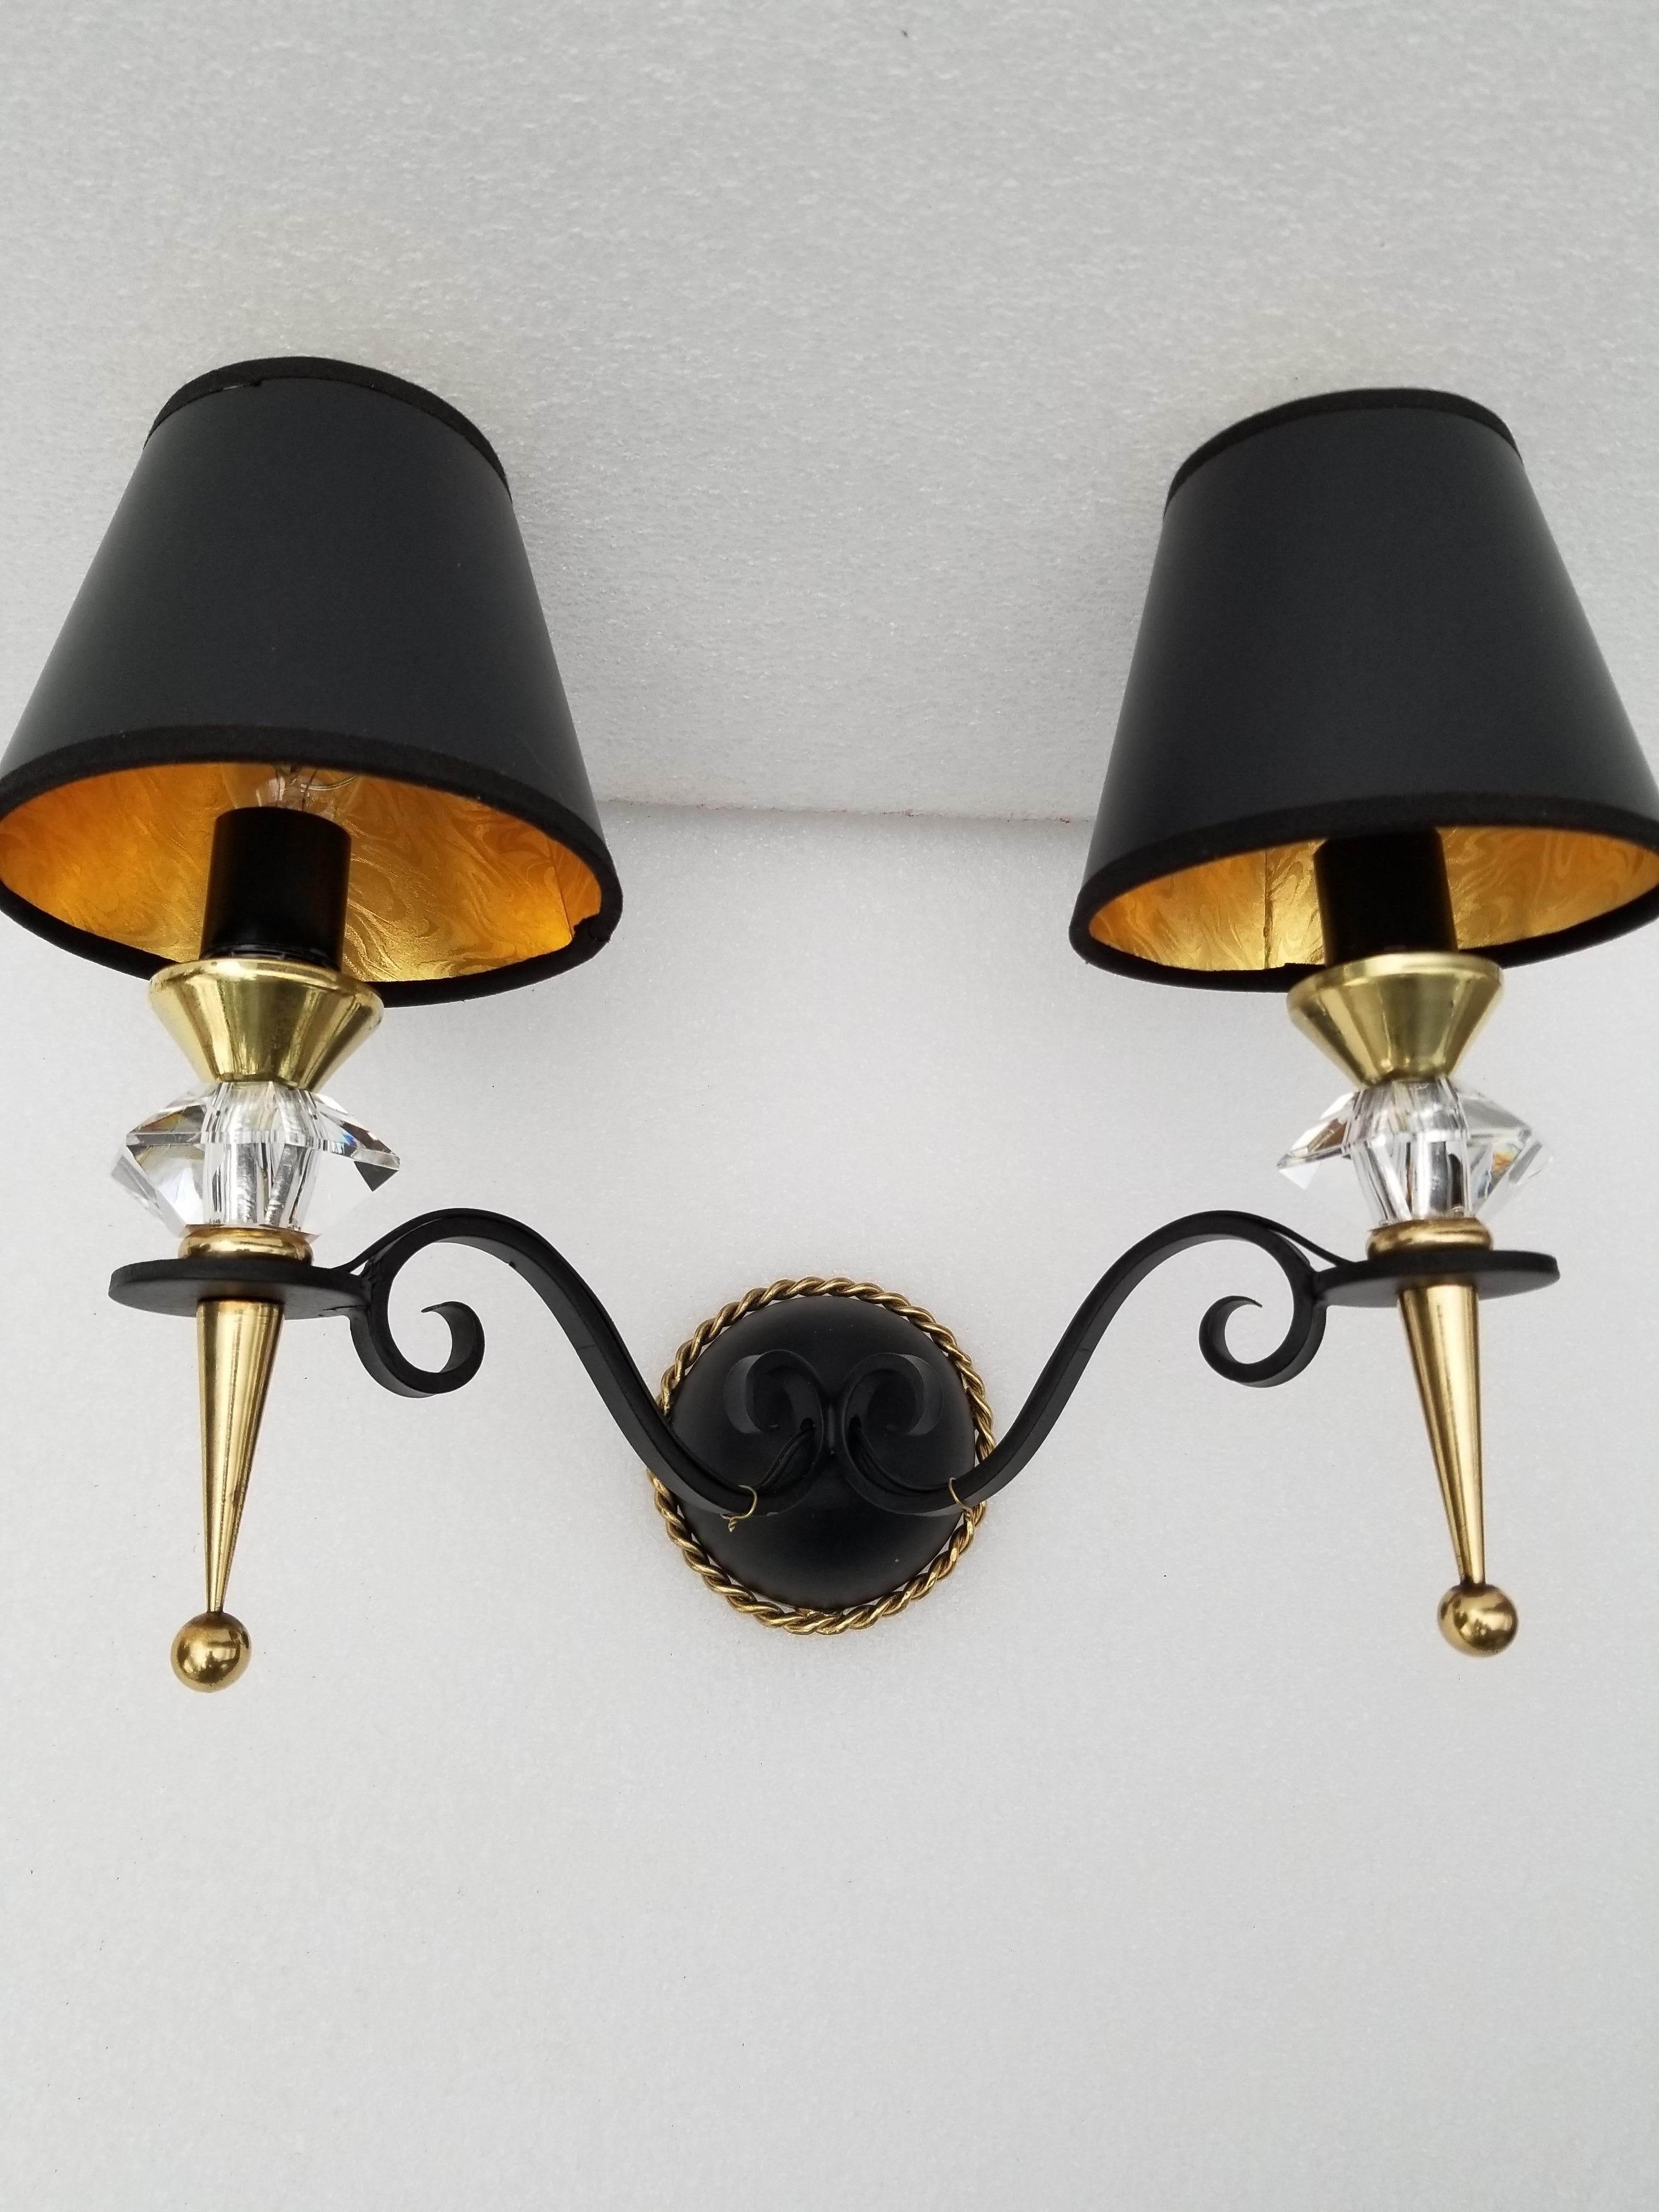 3 sconces by Maison Arlus, wrought iron, brass and crystal de Sèvres.
2 lights, 40 watts max bulb
US rewired and restored.
  